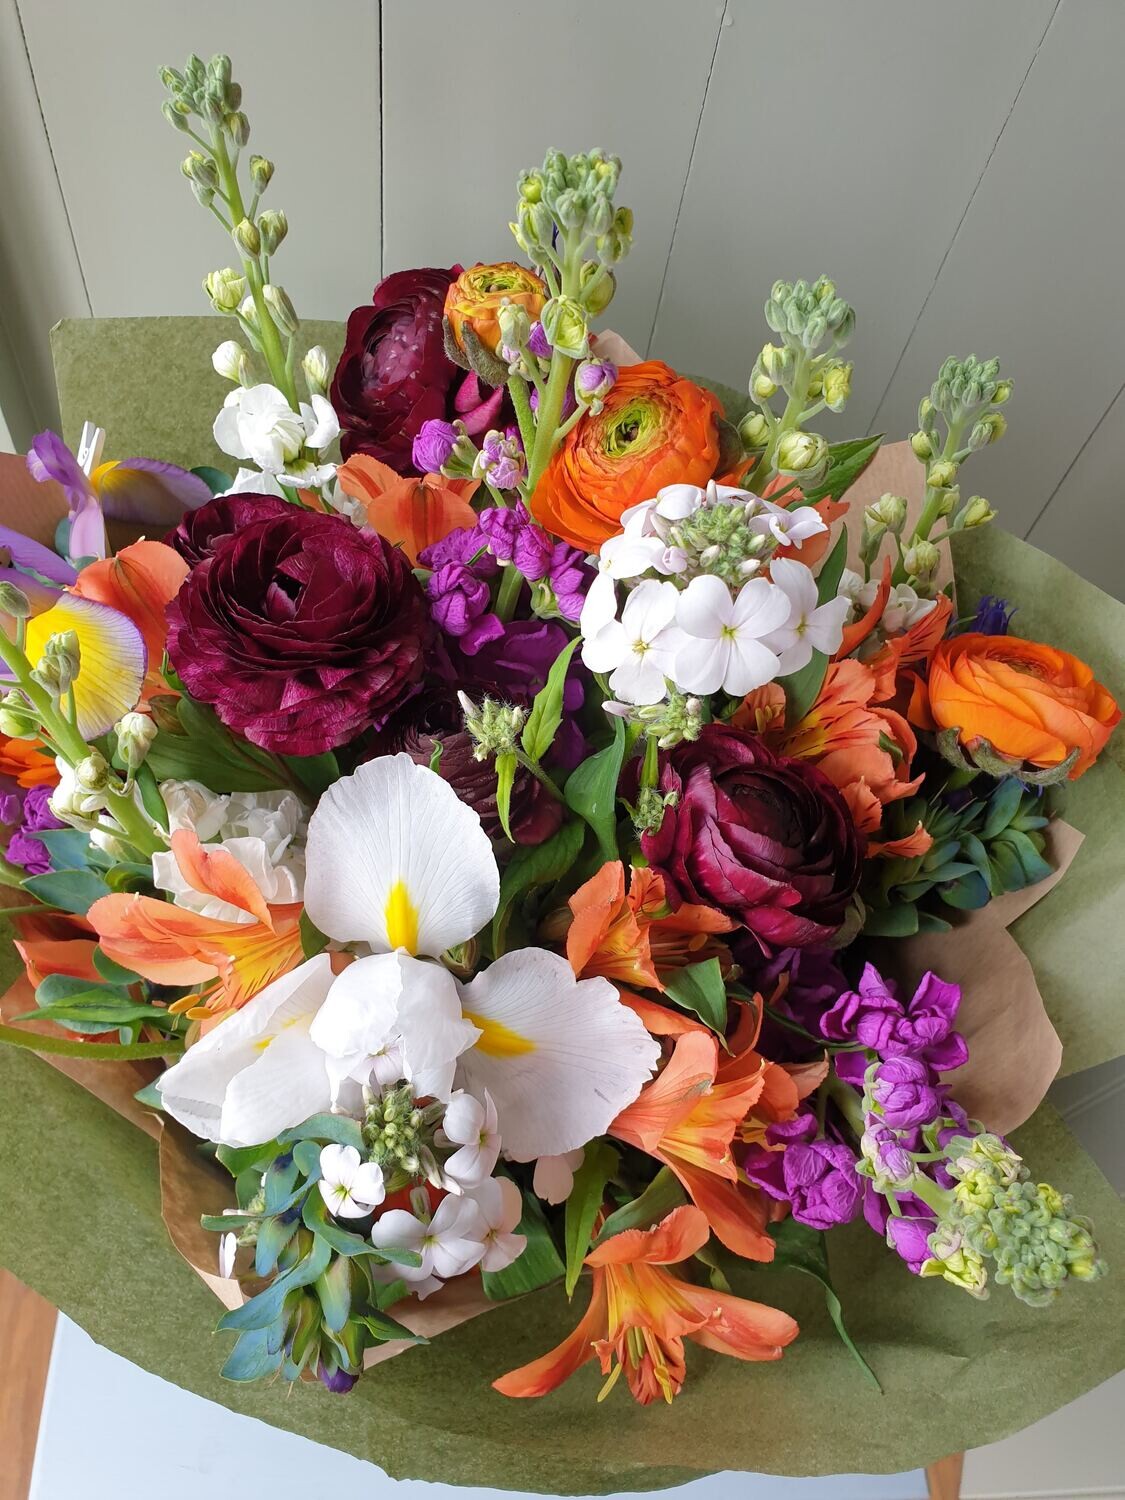 Friday flowers 2 month subscription